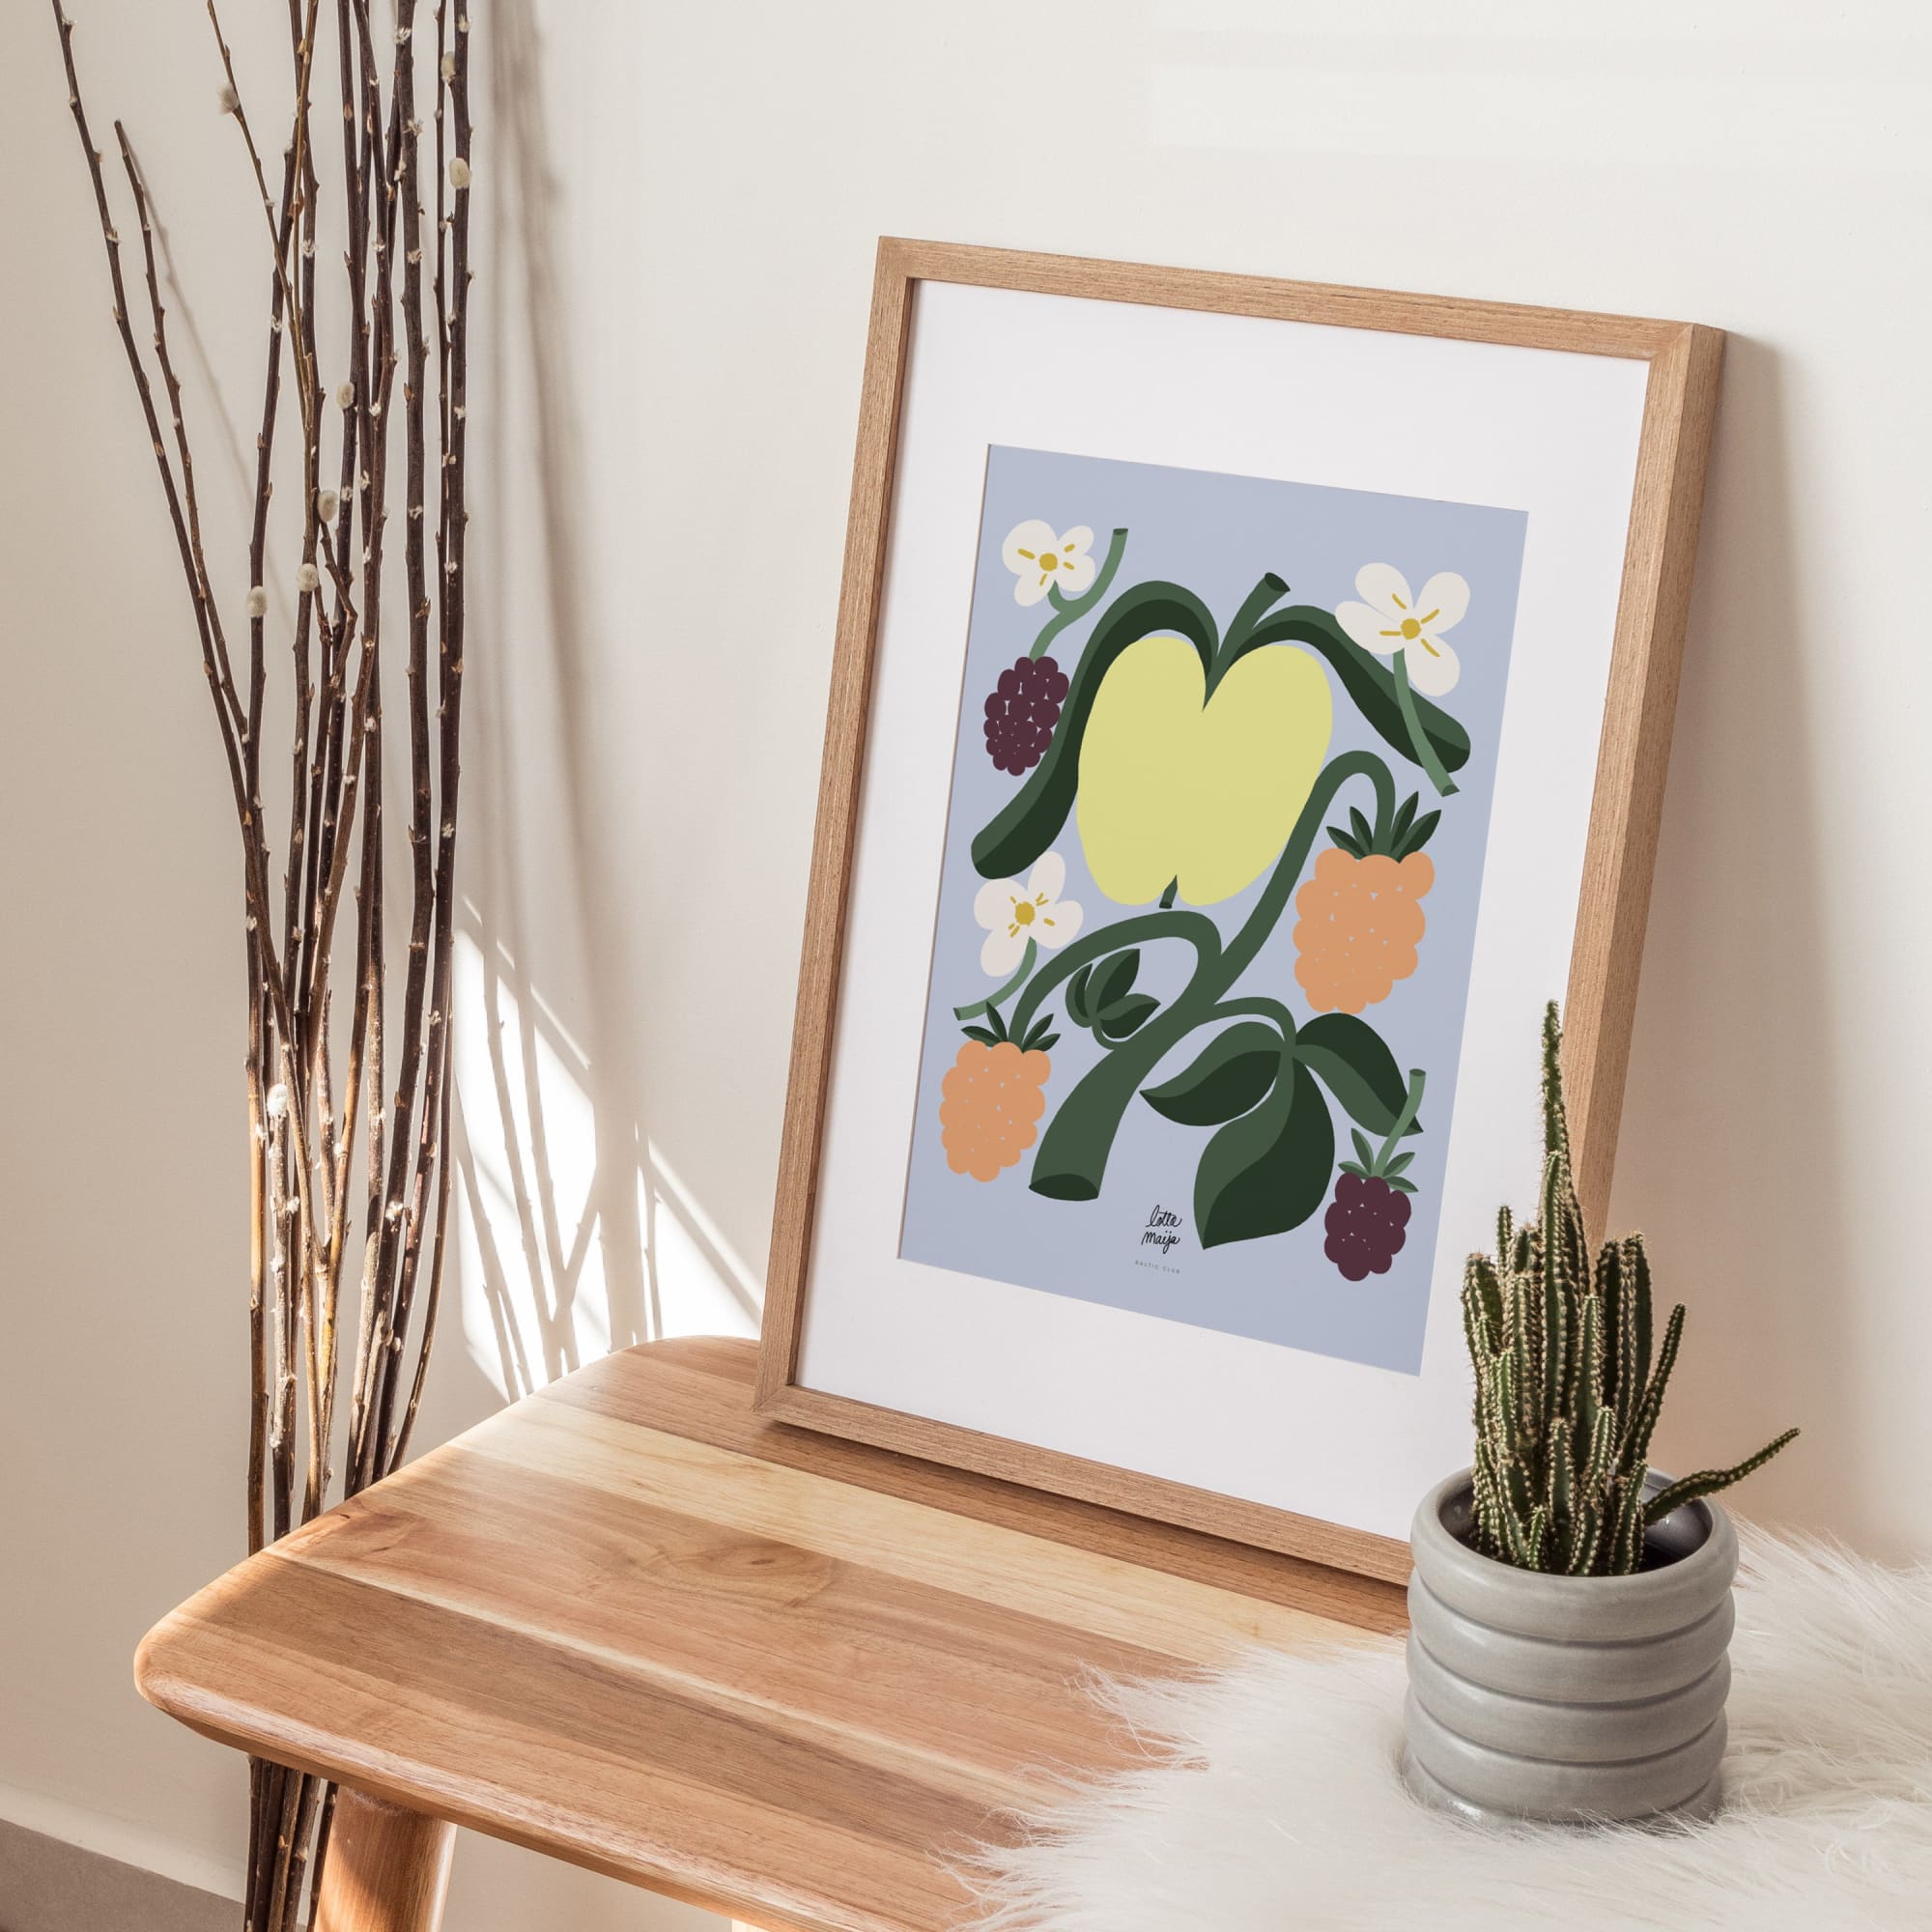 The Apple Art print from artist Lotta Maija, for the Baltic Club, in its frame